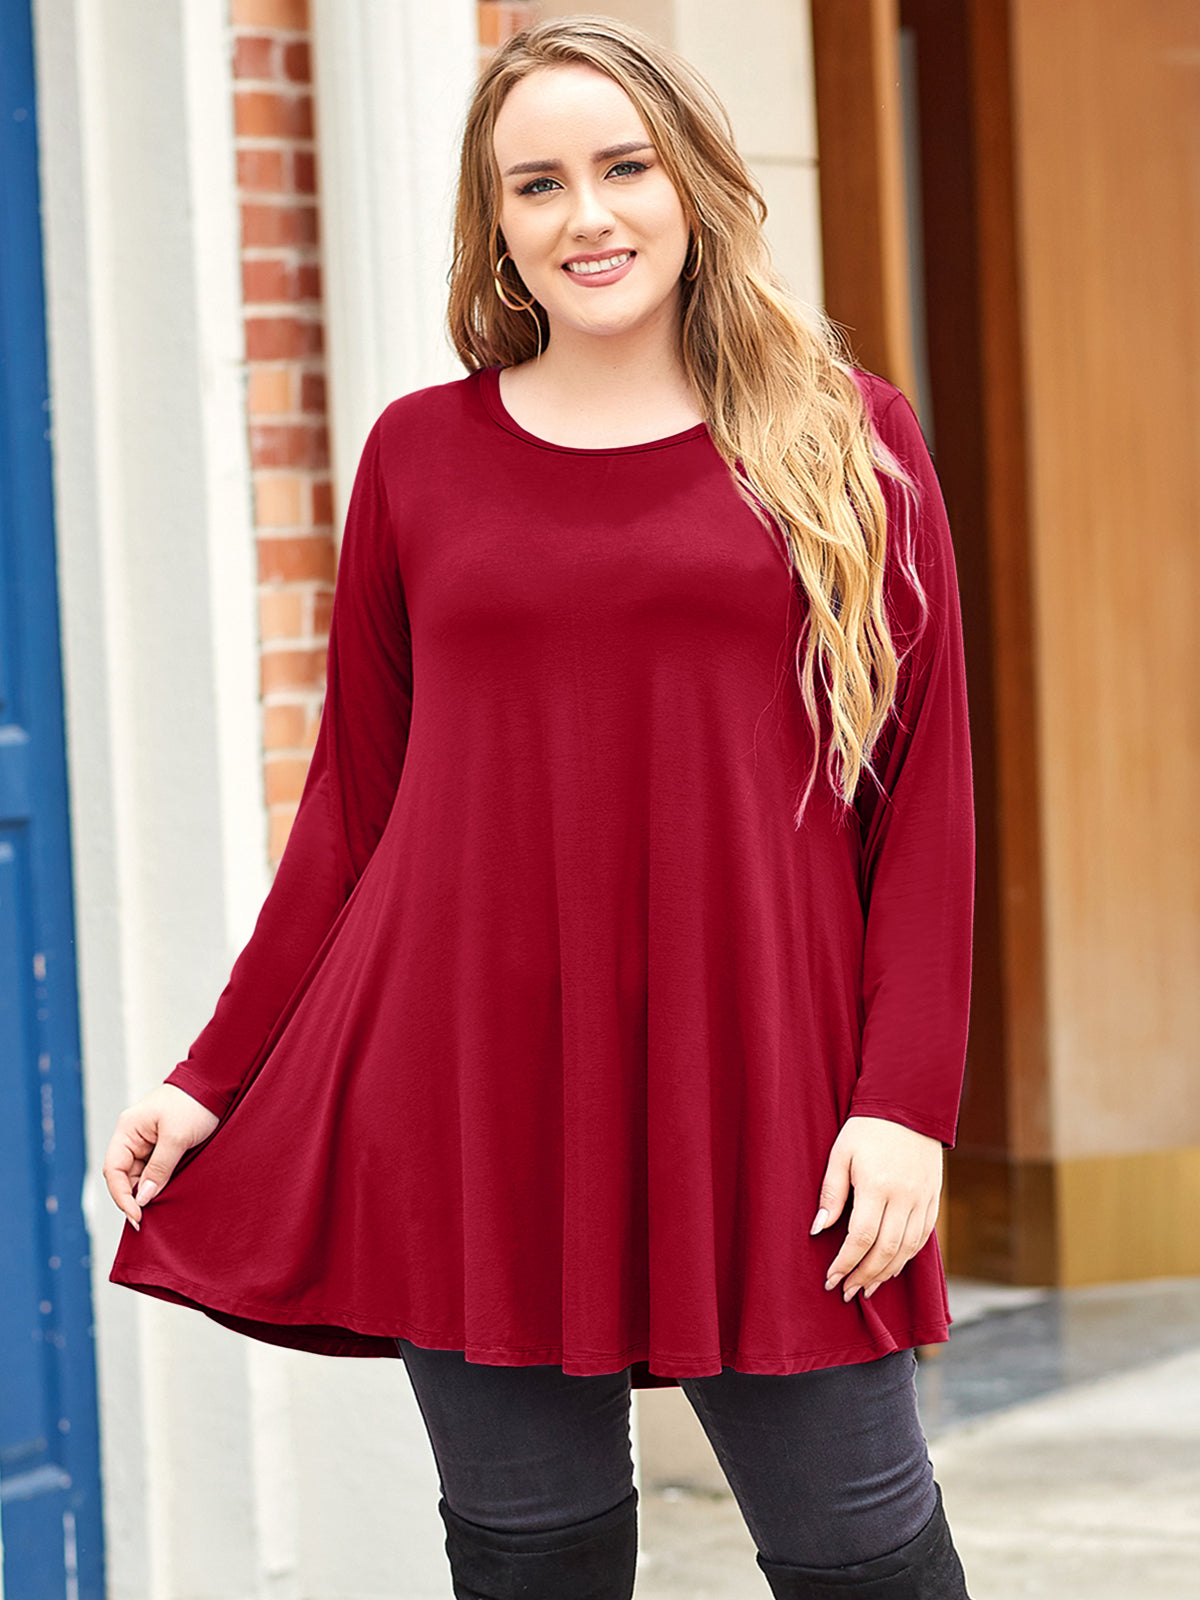 Kkg Womens Long Tunics Or Tops To Wear With Leggings Plus Size, Casual  Loose Fit O Neck Blouses Long Sleeves Shirt